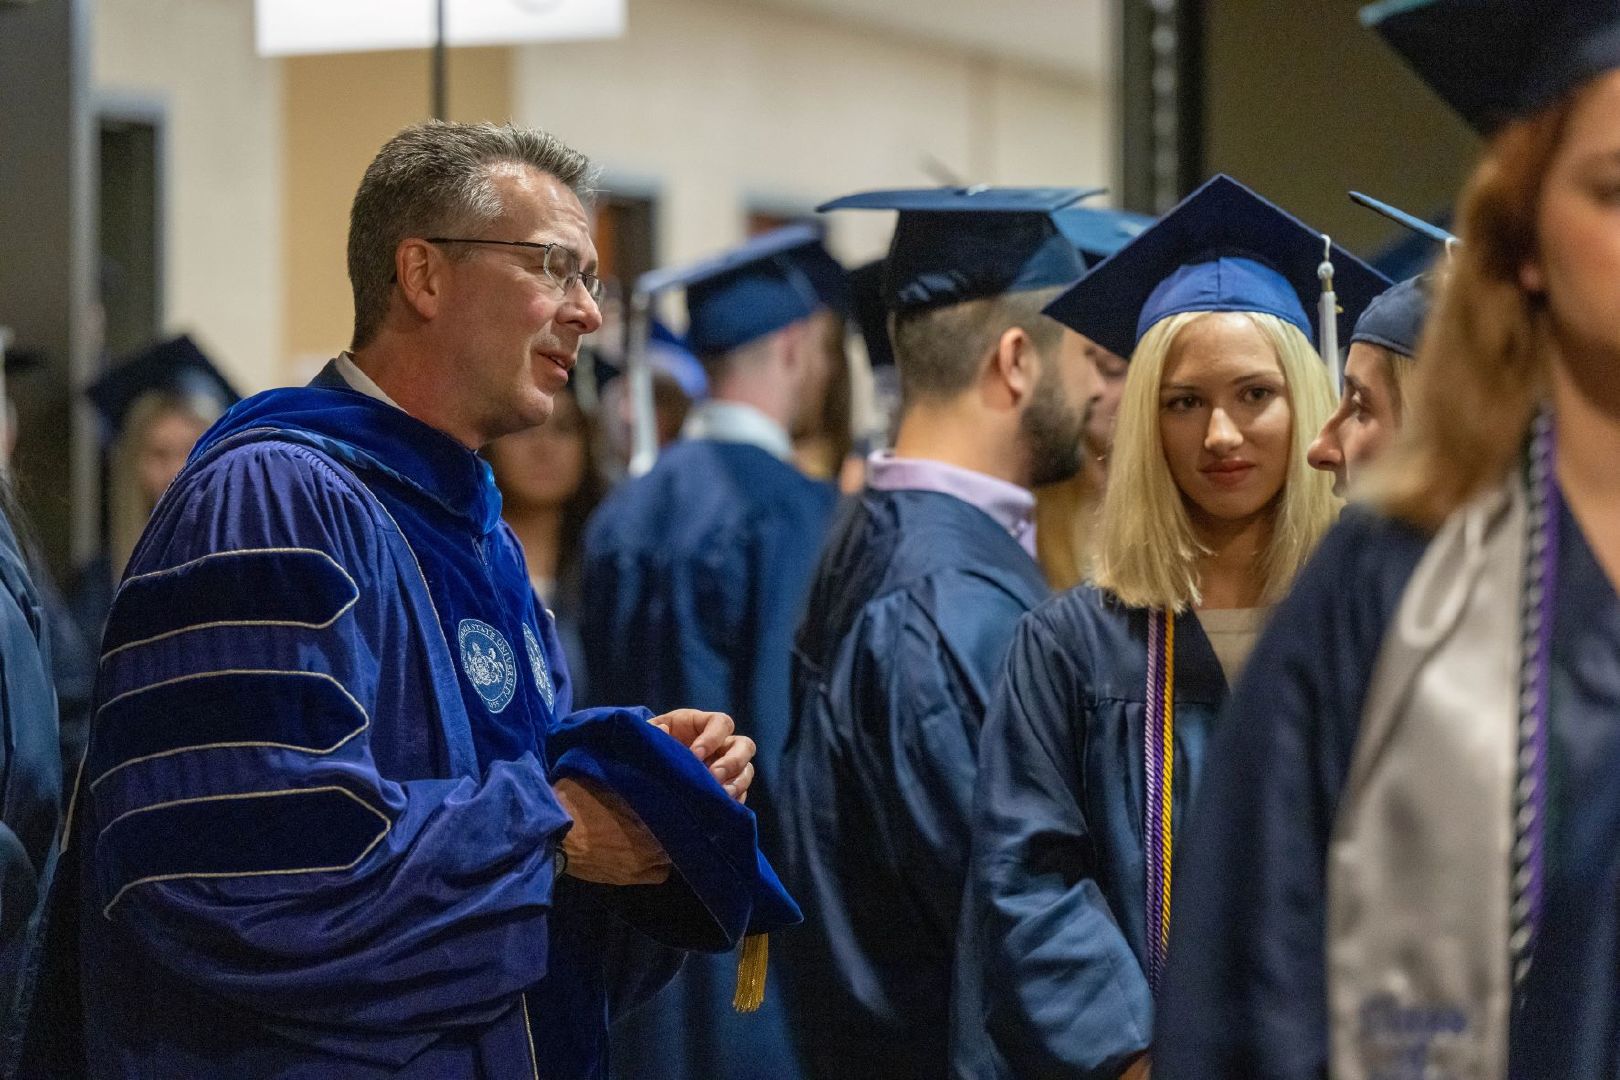 Penn State Behrend Chancellor Ralph Ford talks with students prior to the college's spring 2022 commencement program.